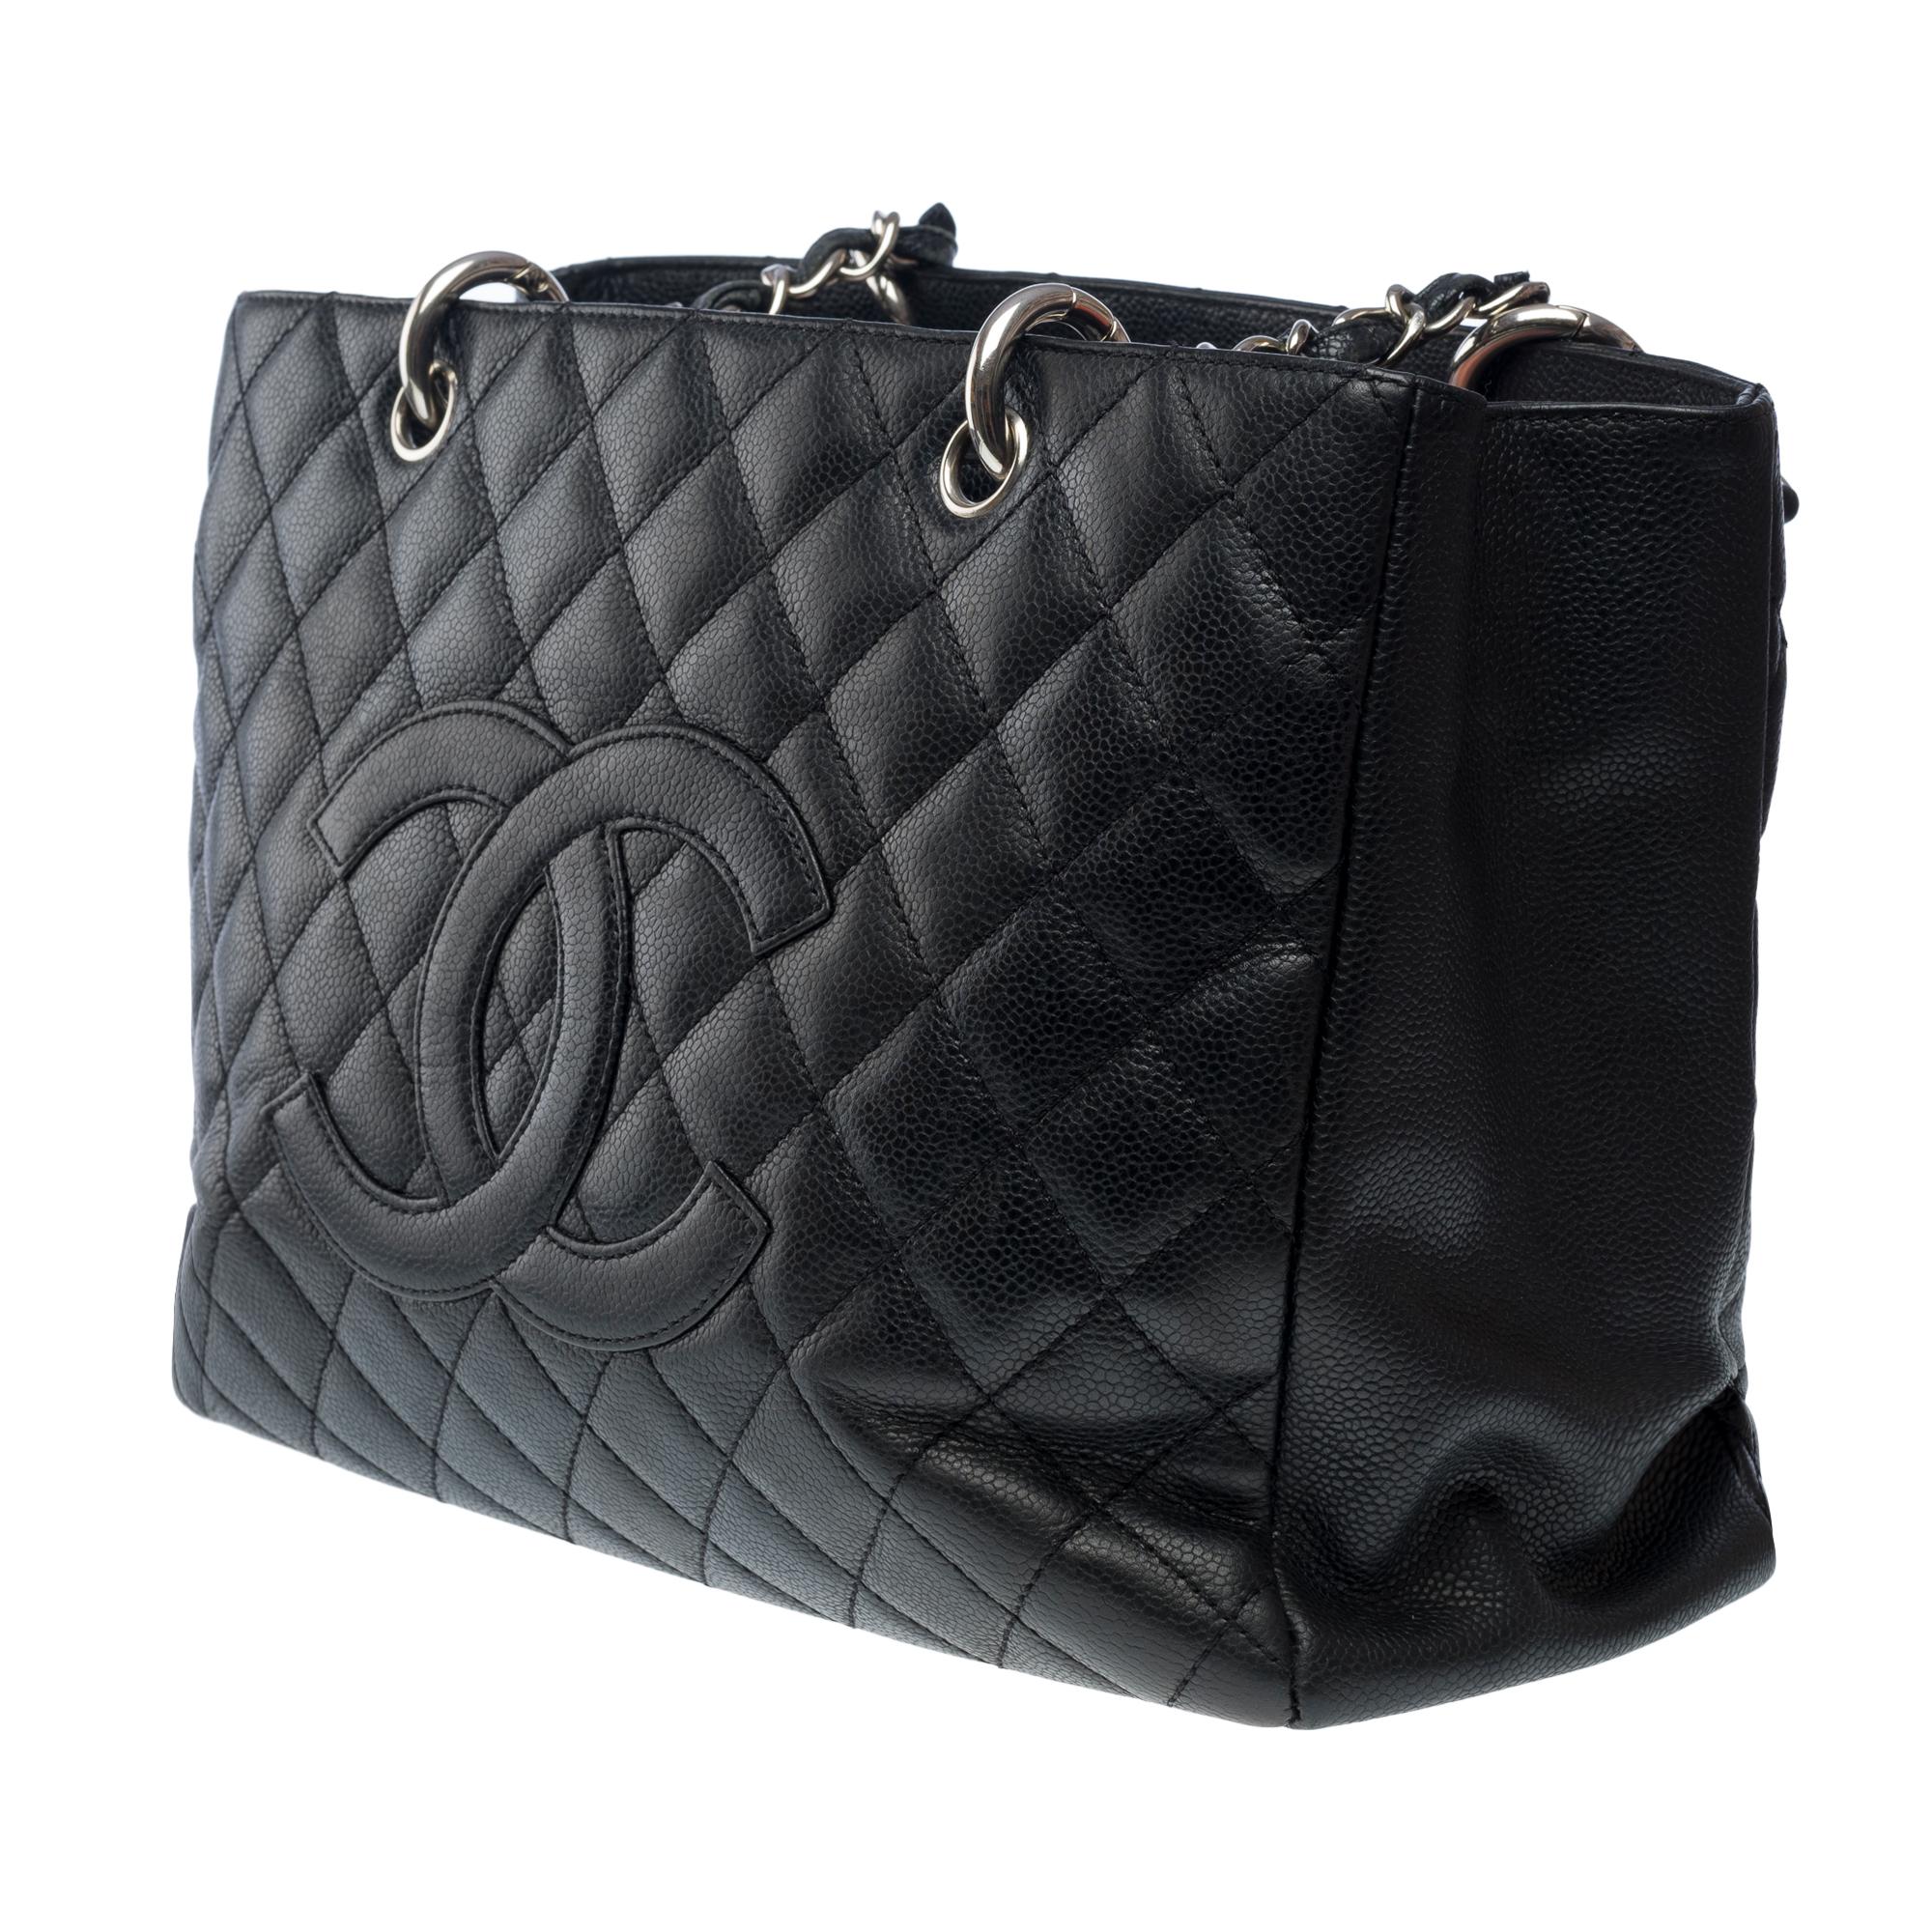 Women's  Chanel Grand Shopping Tote bag (GST) in black Caviar quilted leather, SHW For Sale